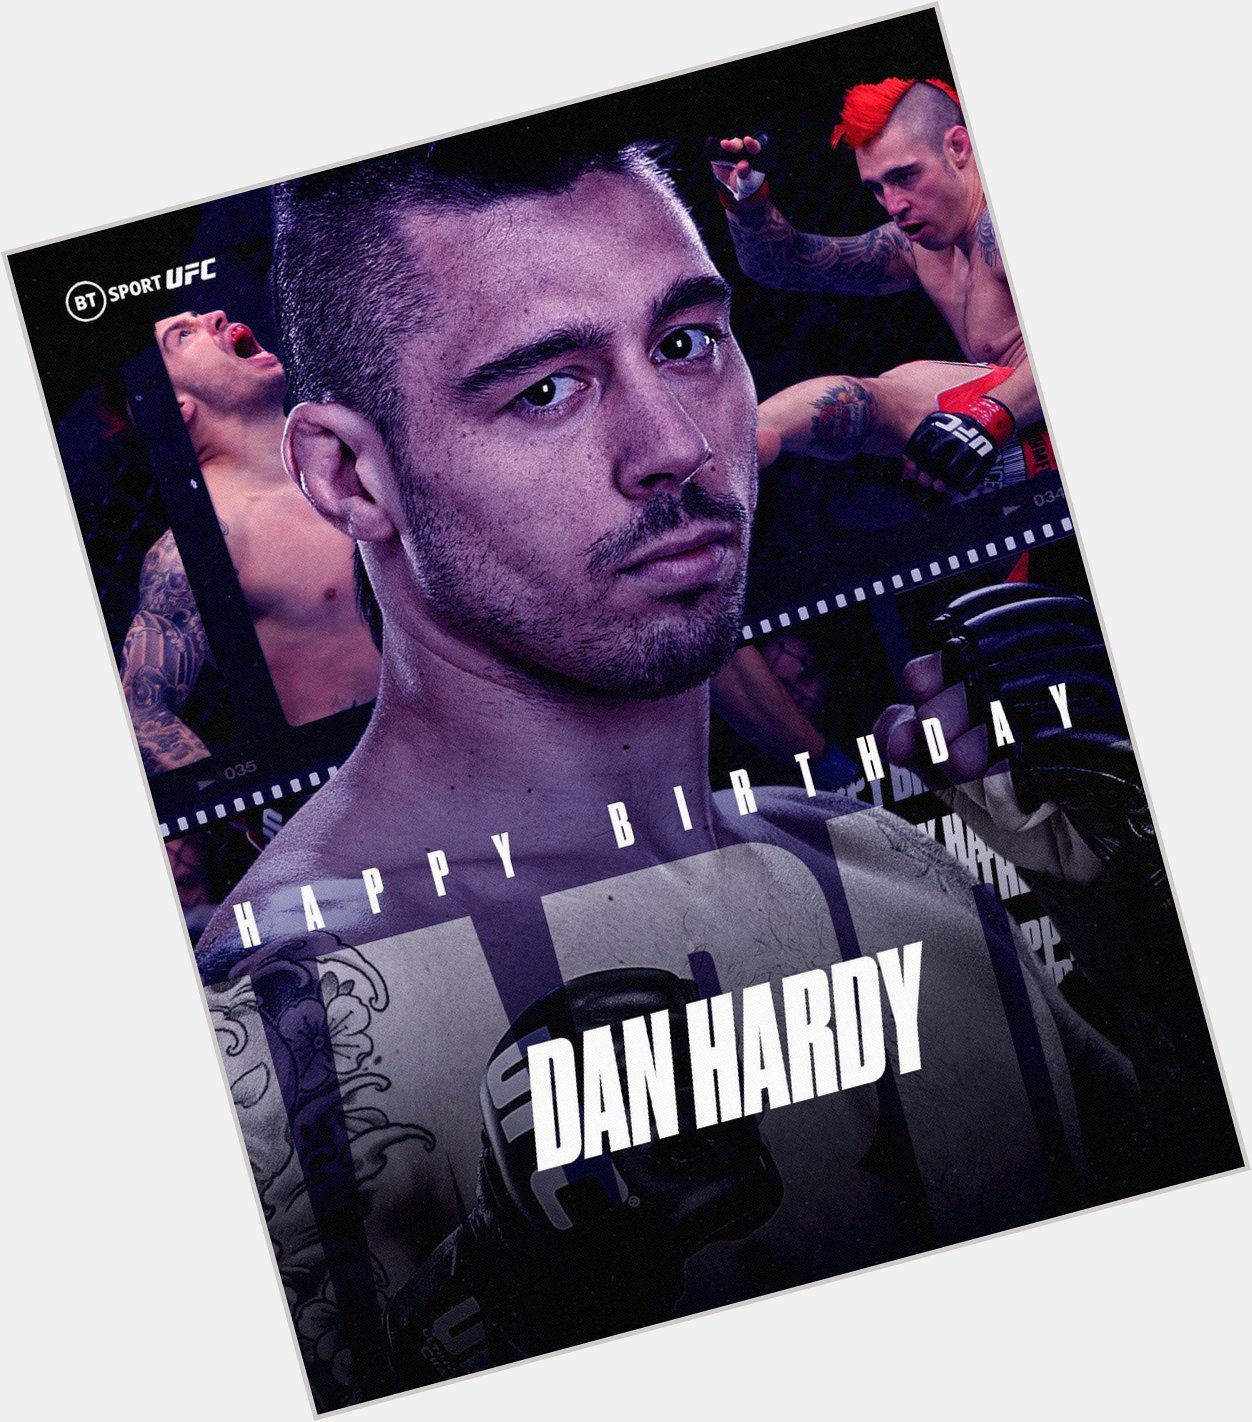 Happy 41st birthday to the one-and-only Dan Hardy! The best analyst in the game   Enjoy the day  